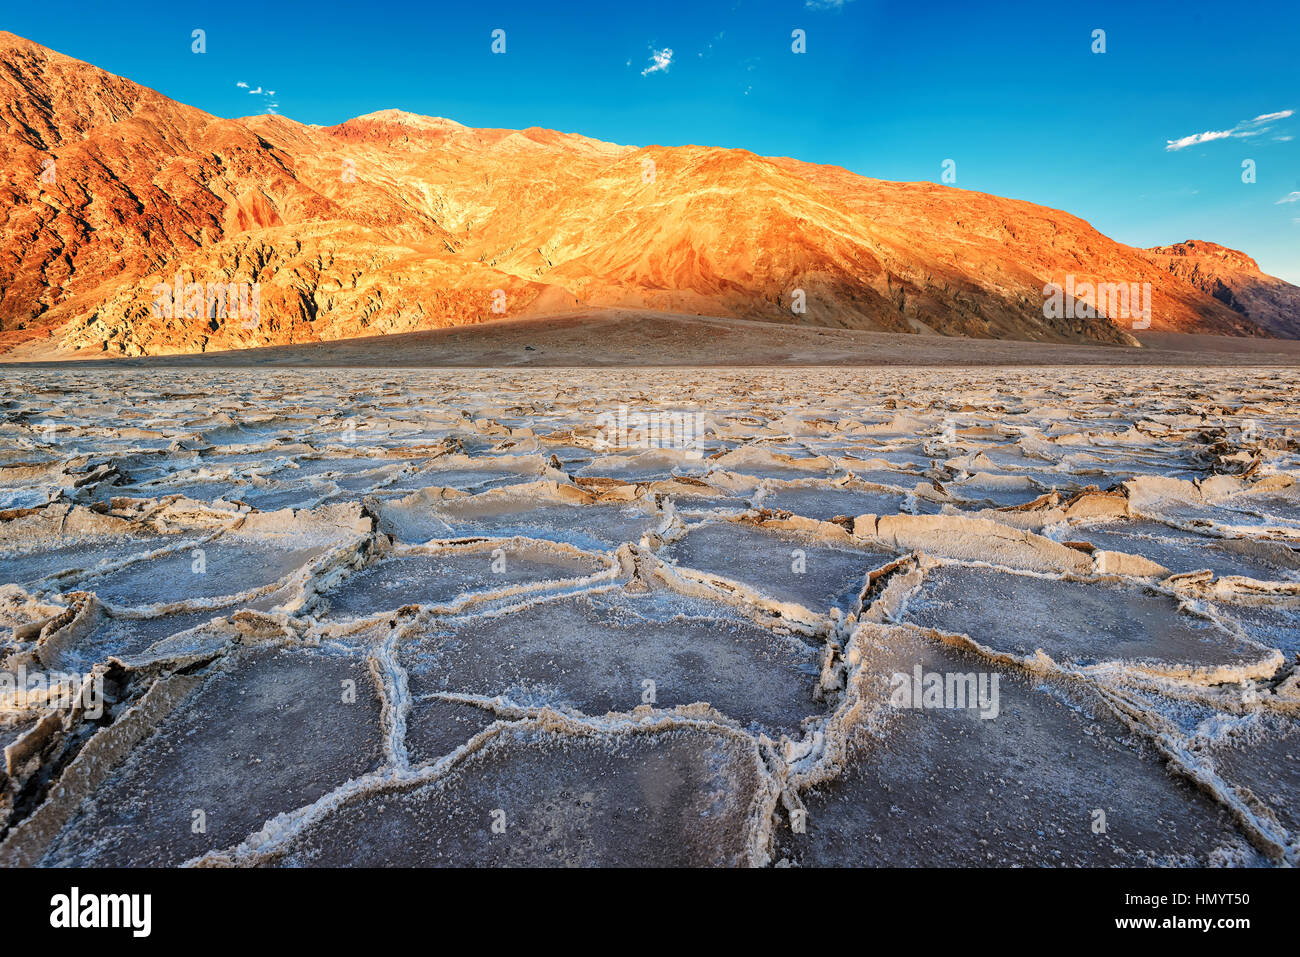 Sunset at Badwater basin, Death Valley National Park, California. Stock Photo